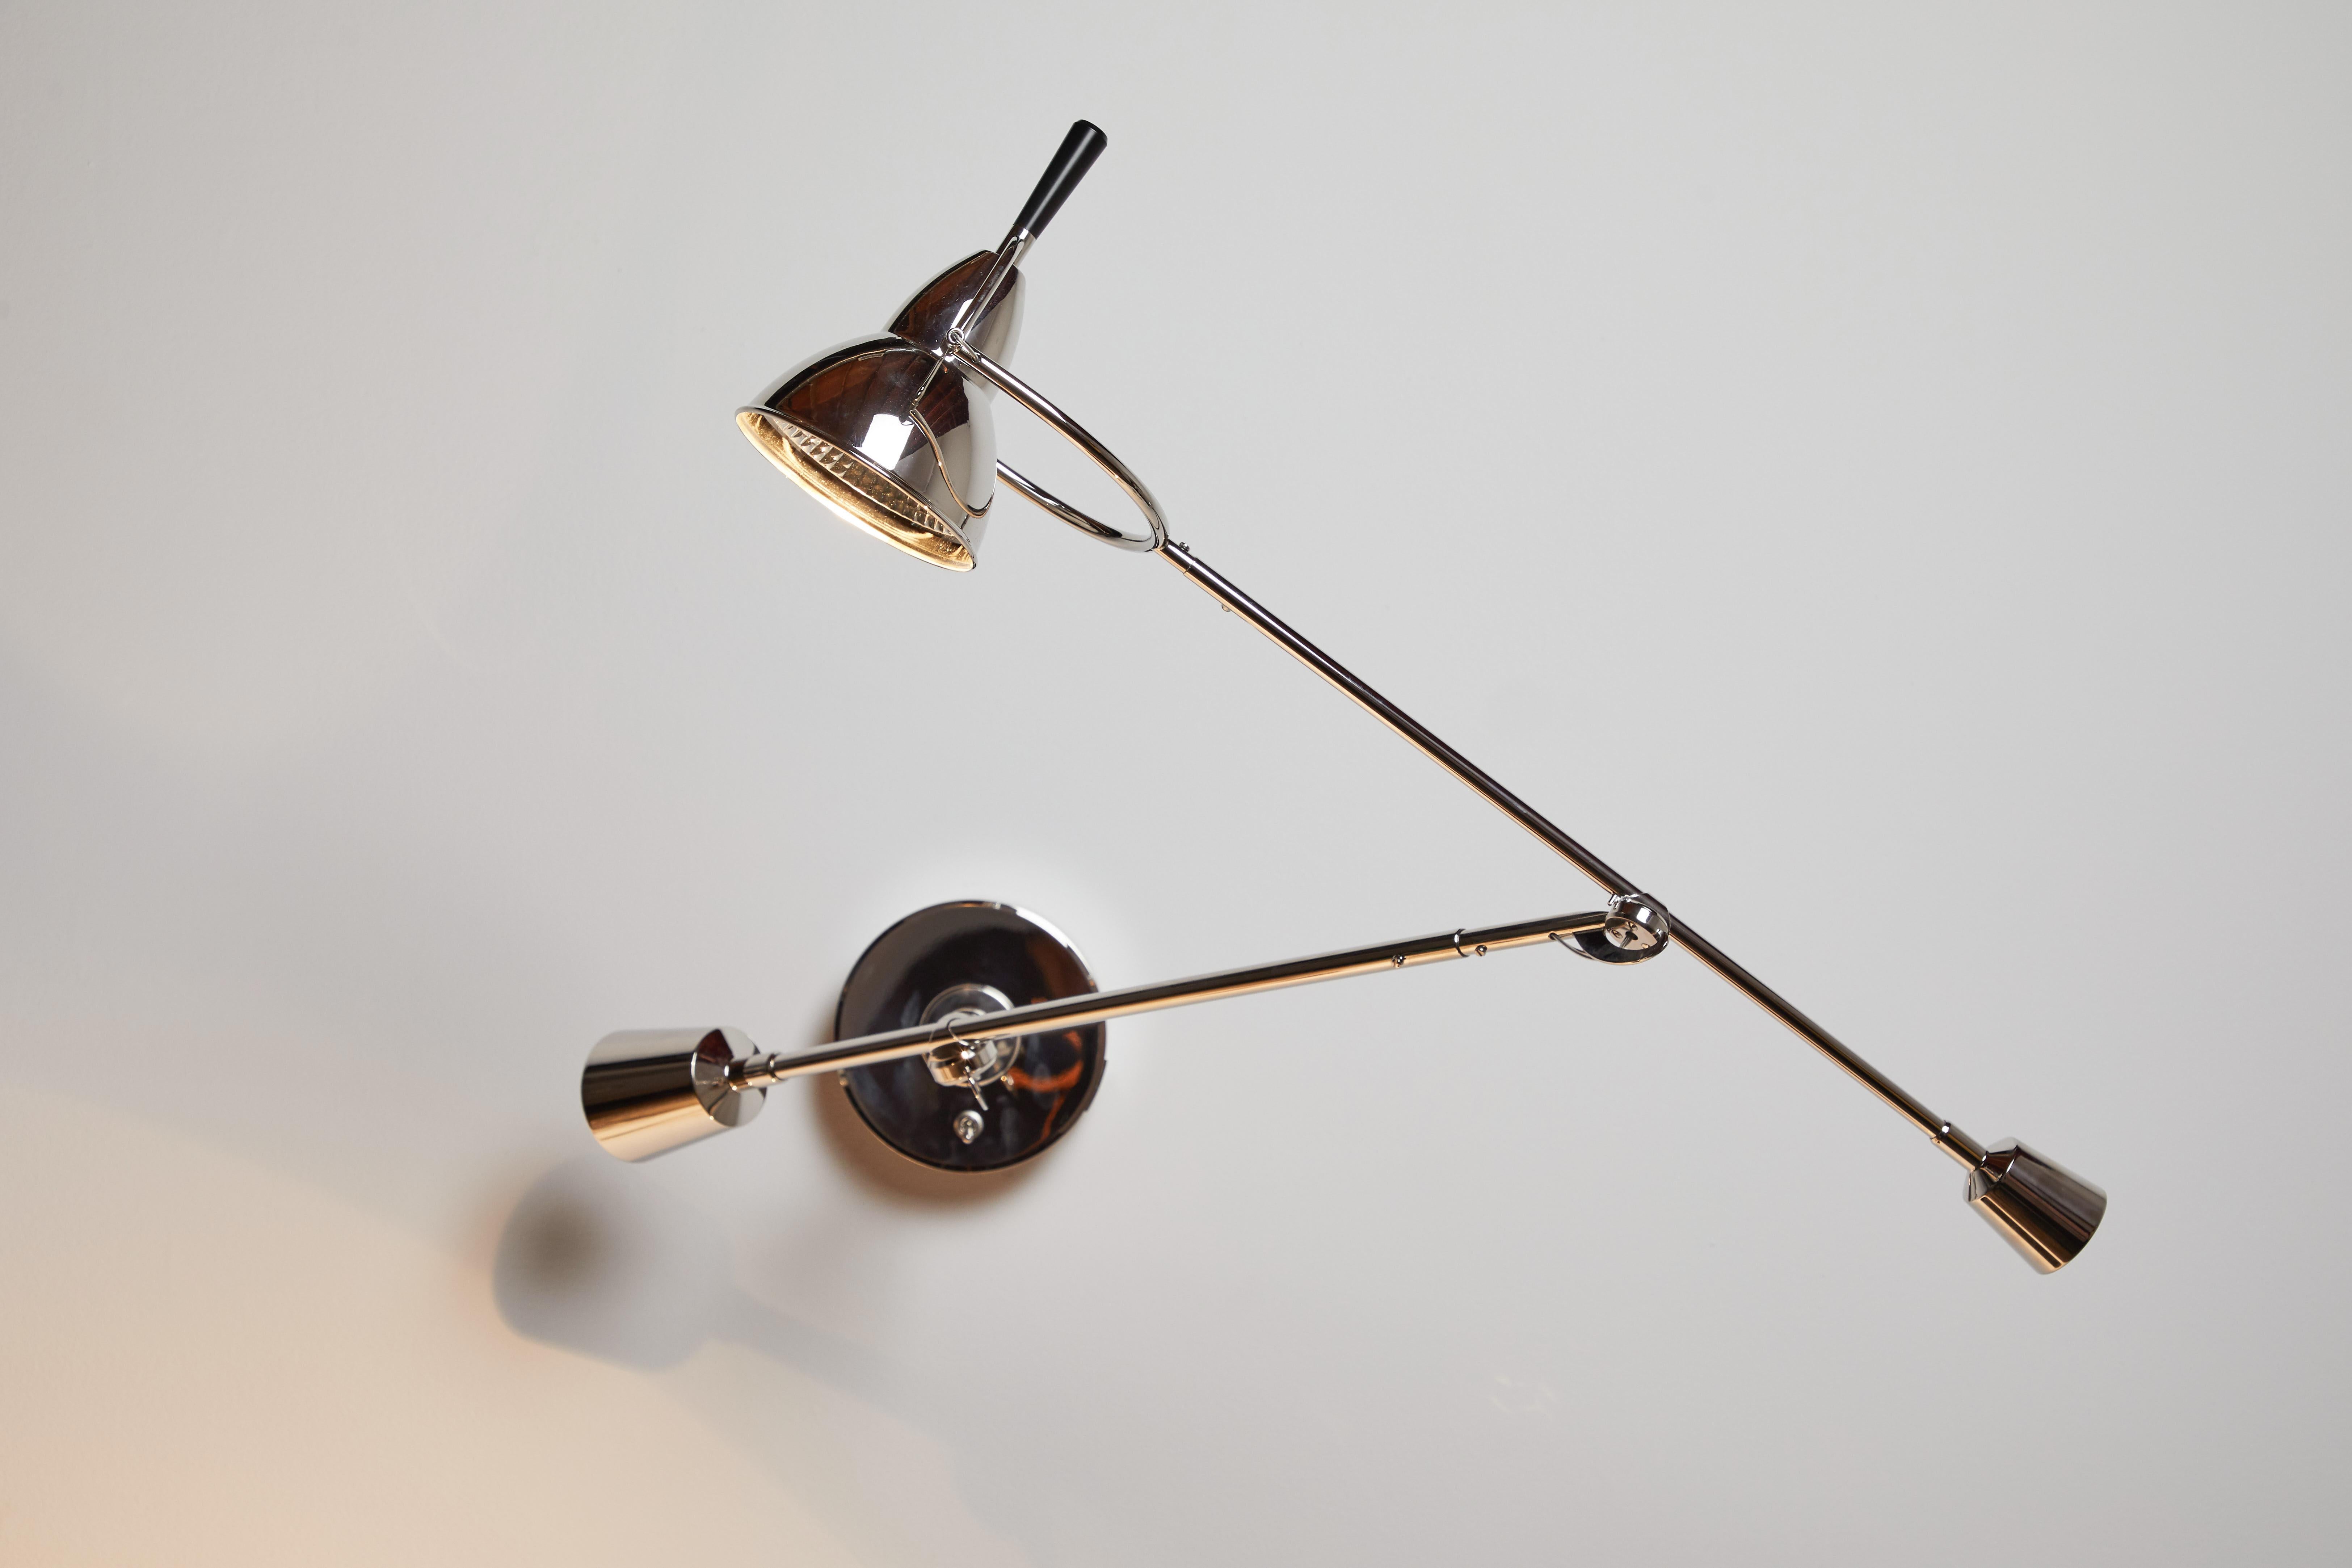 Model EB 27 wall light by Eduard-Wilfrid Buquet. Originally designed in 1927. Current production manufactured in Germany for Tecnolumen. Silver plated metal. Wired for U.S junction boxes. Shade and arms adjust to various positions. Takes one GY